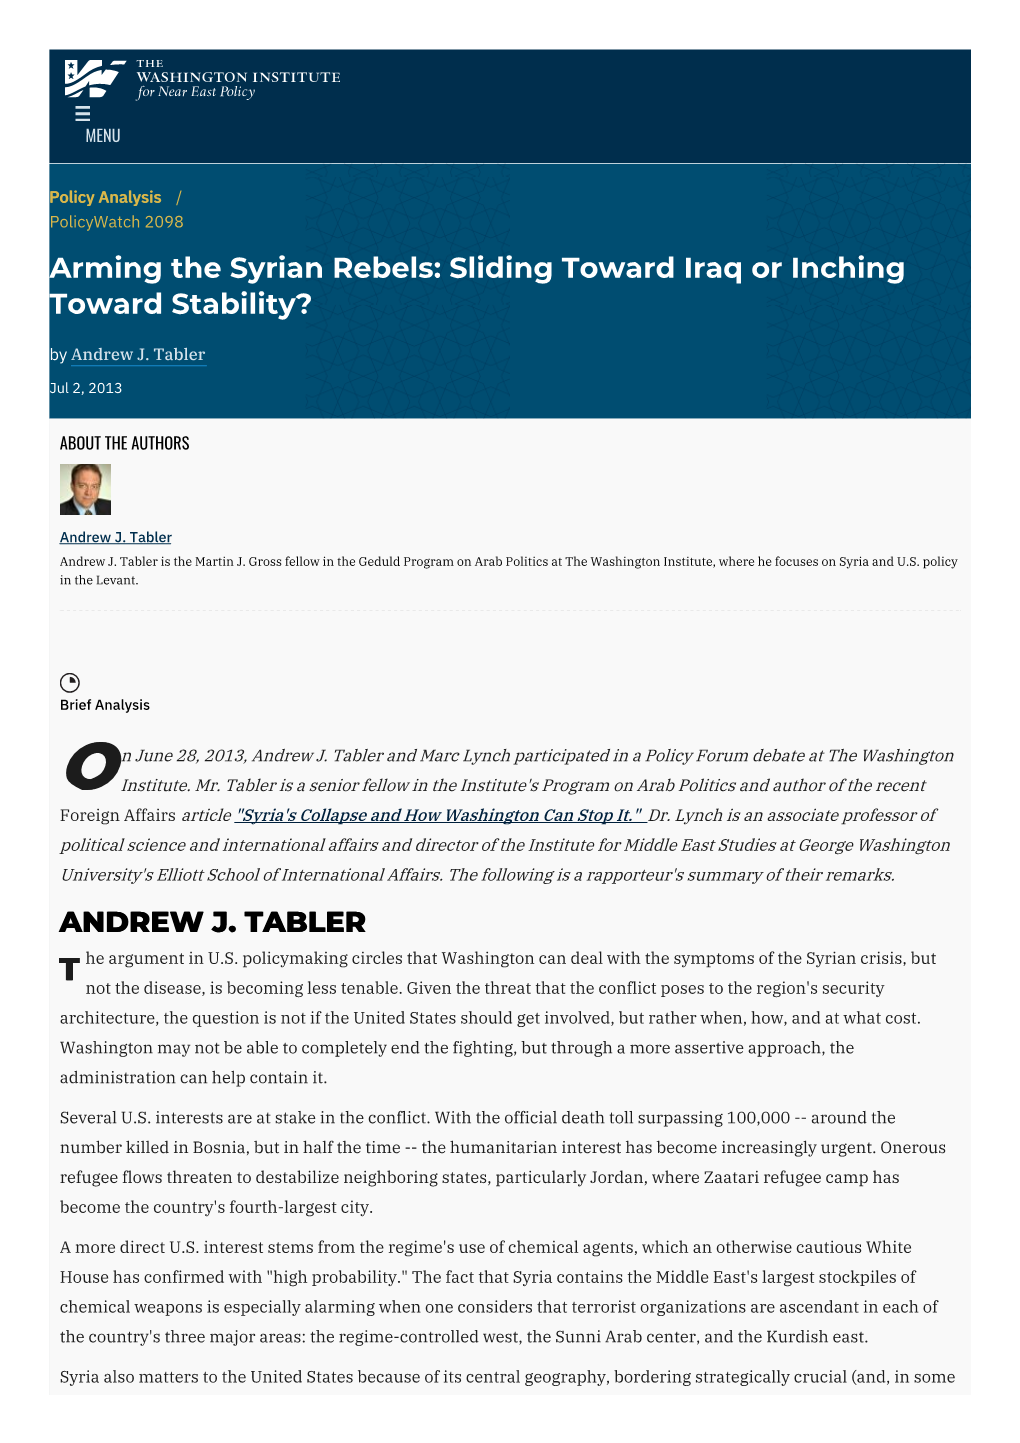 Arming the Syrian Rebels: Sliding Toward Iraq Or Inching Toward Stability? by Andrew J